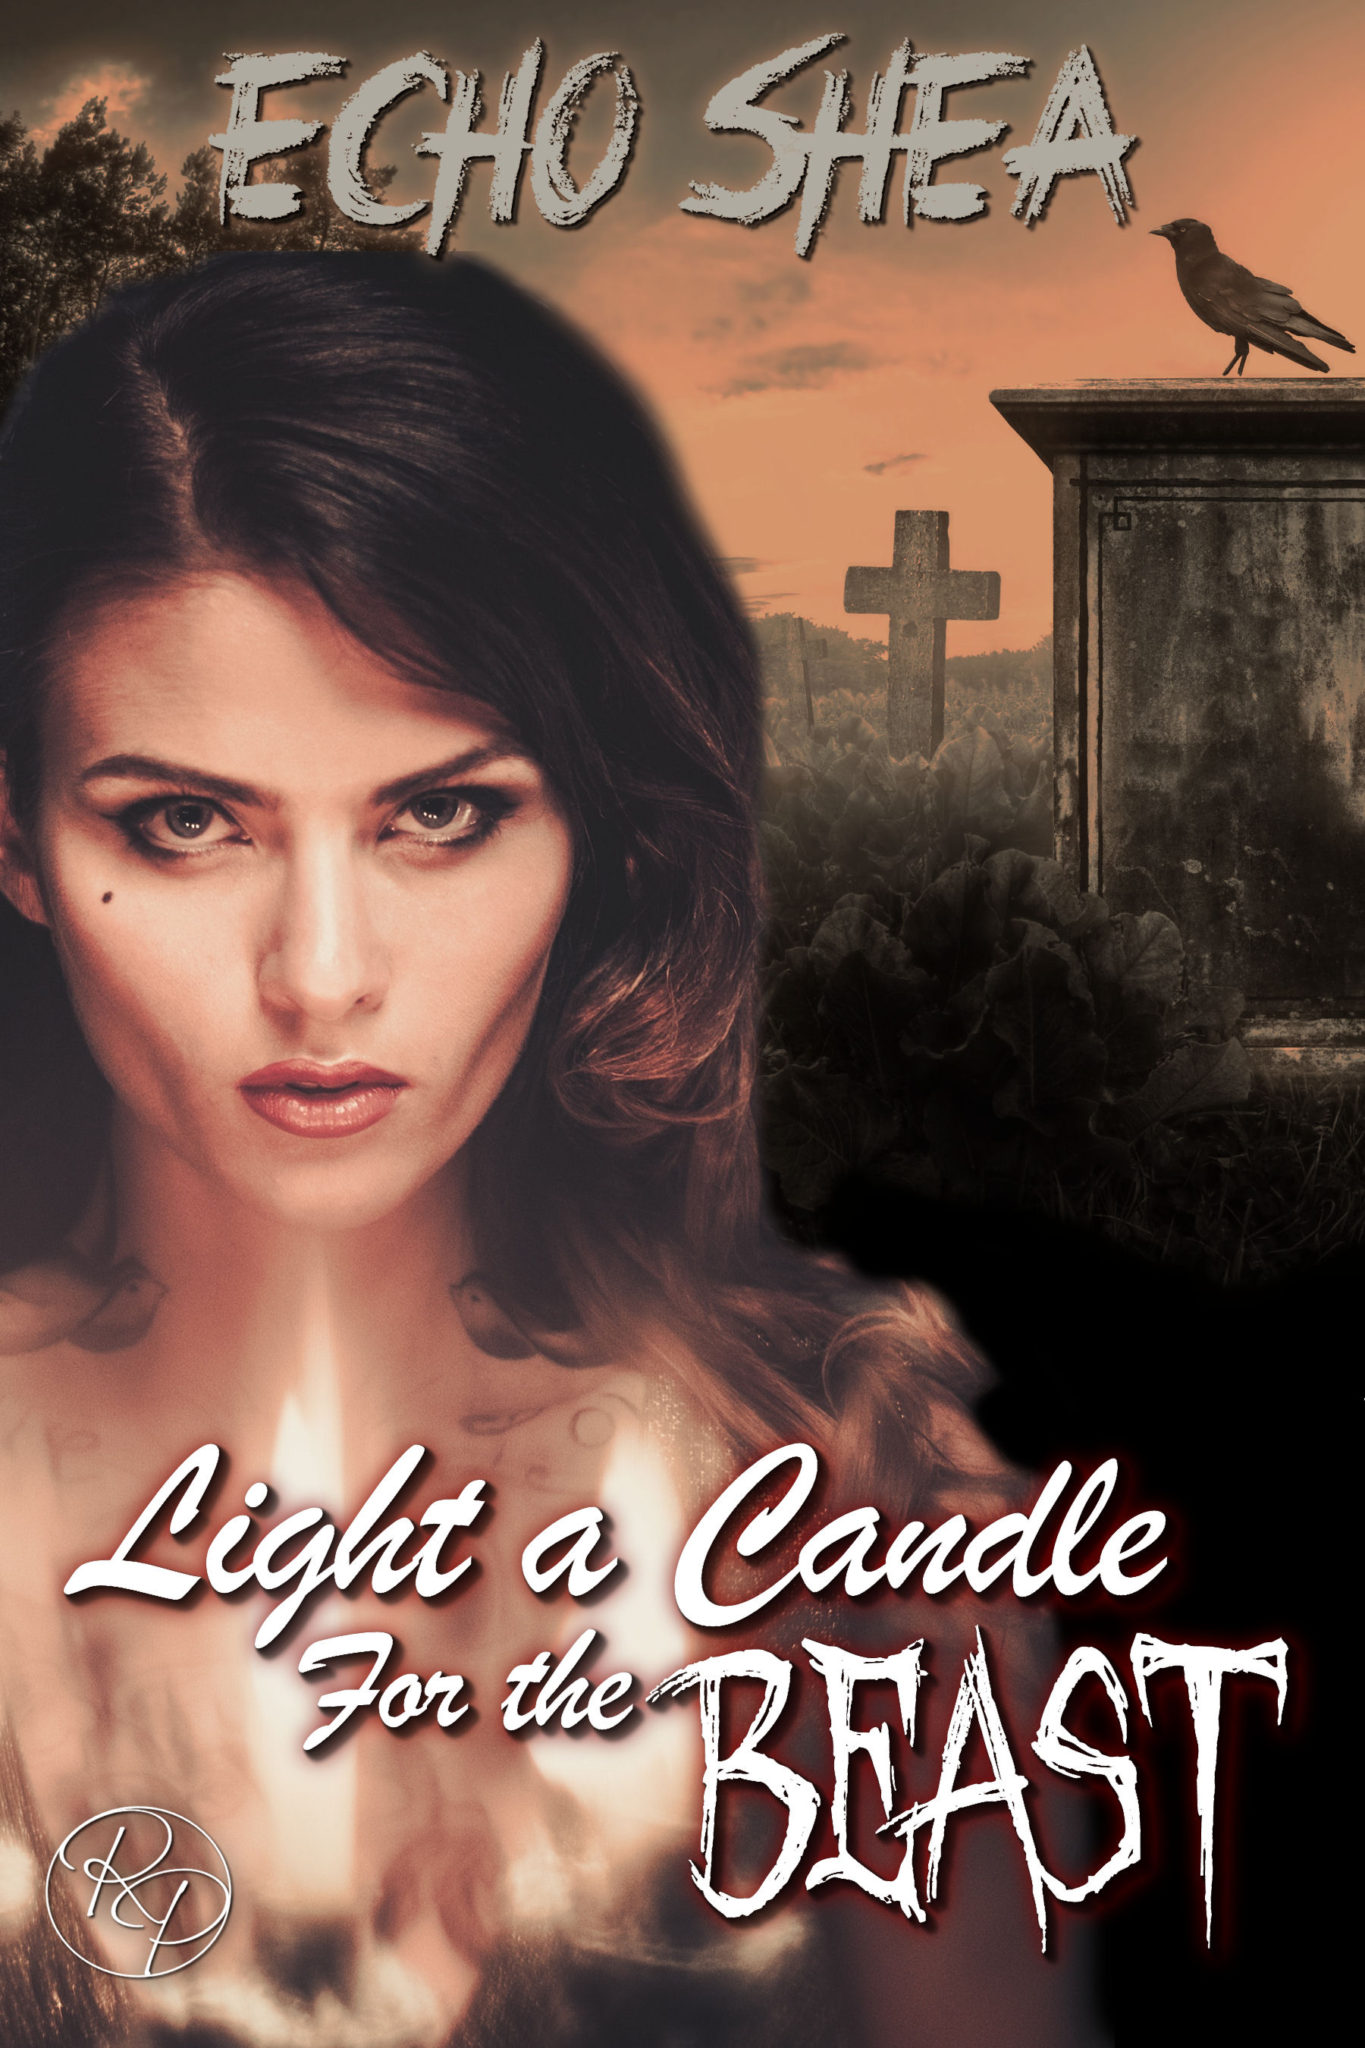 Light a Candle for the Beast by Echo Shea